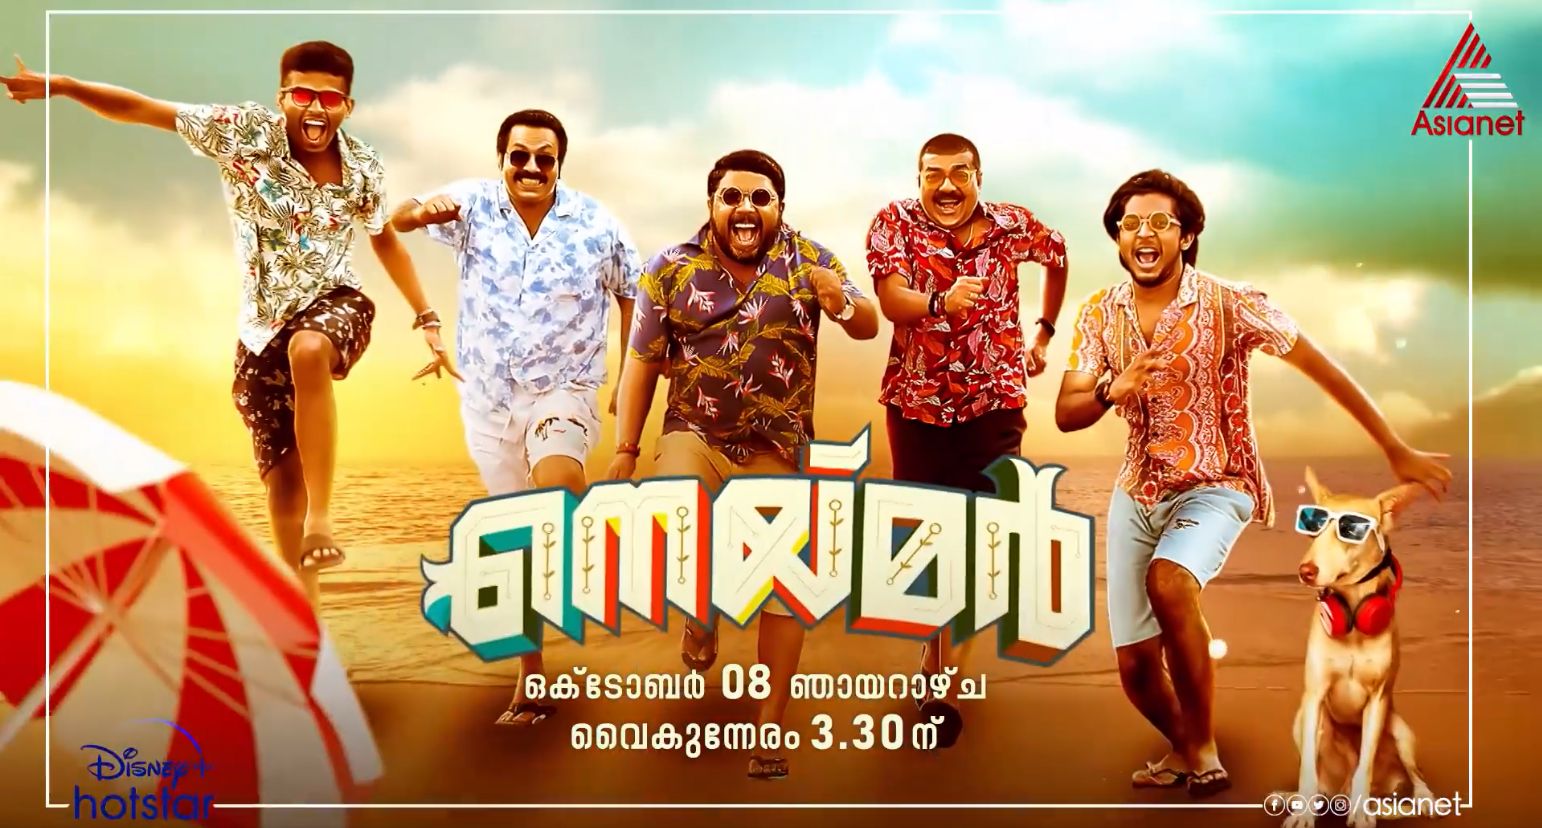 Hotel California Movie Premier On Asianet - 6th April at 5.30 P.M 2